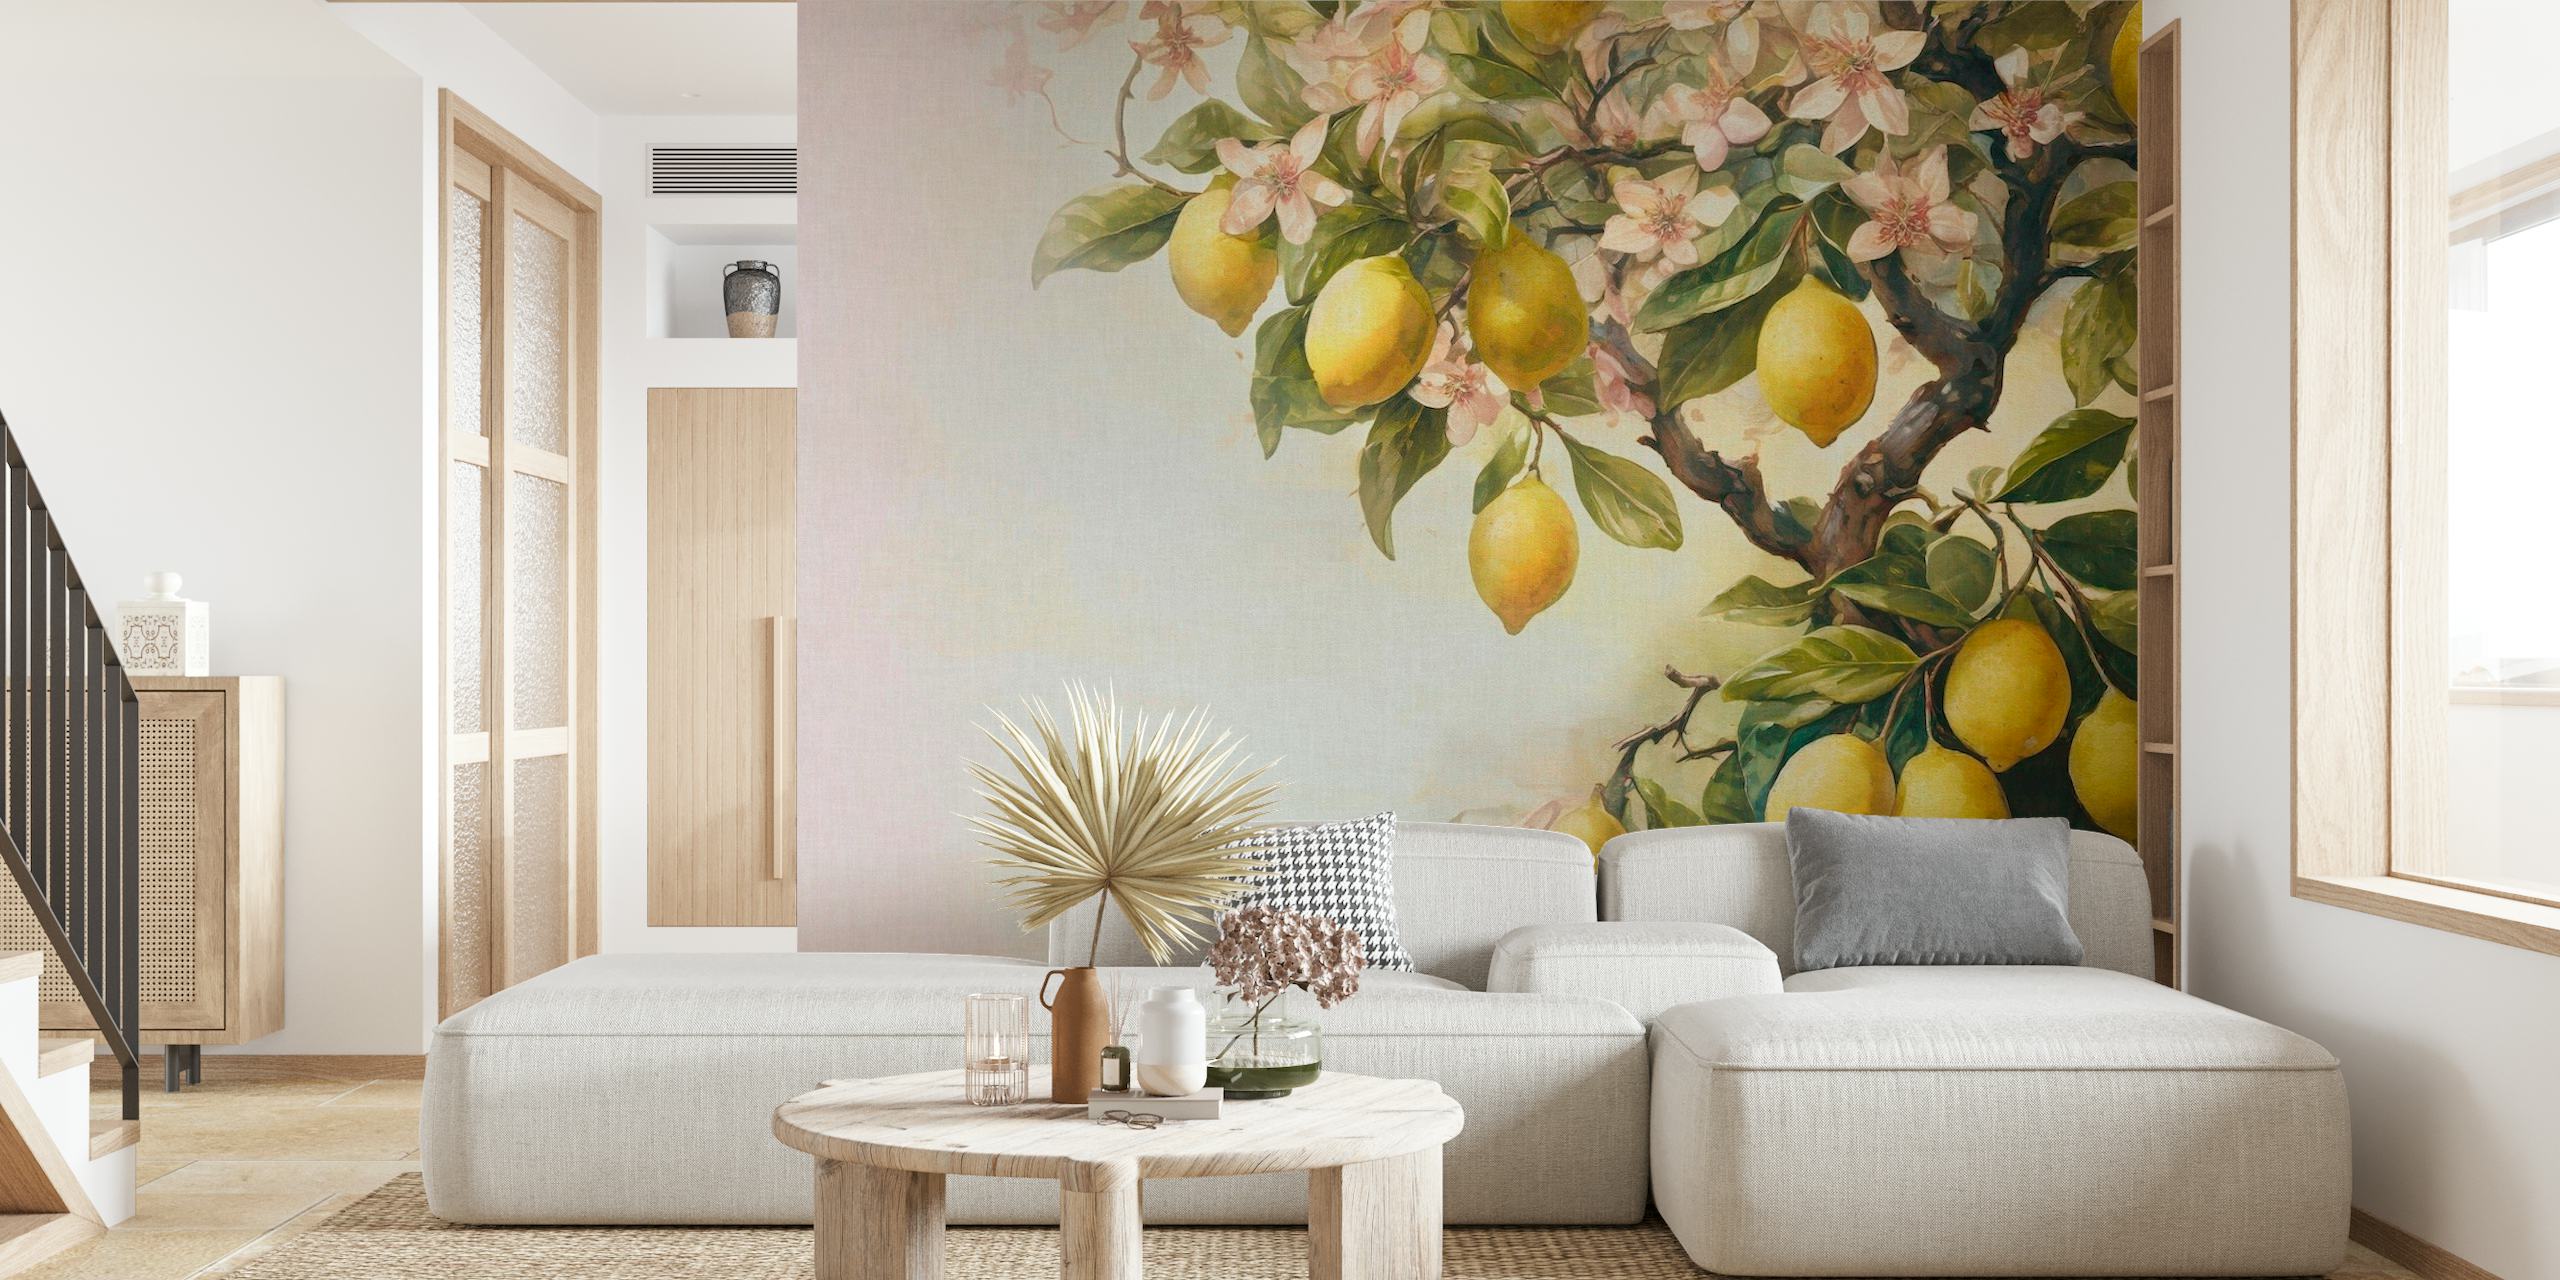 Wall mural of a lemon tree with ripe lemons and blossoms in soft vintage tones